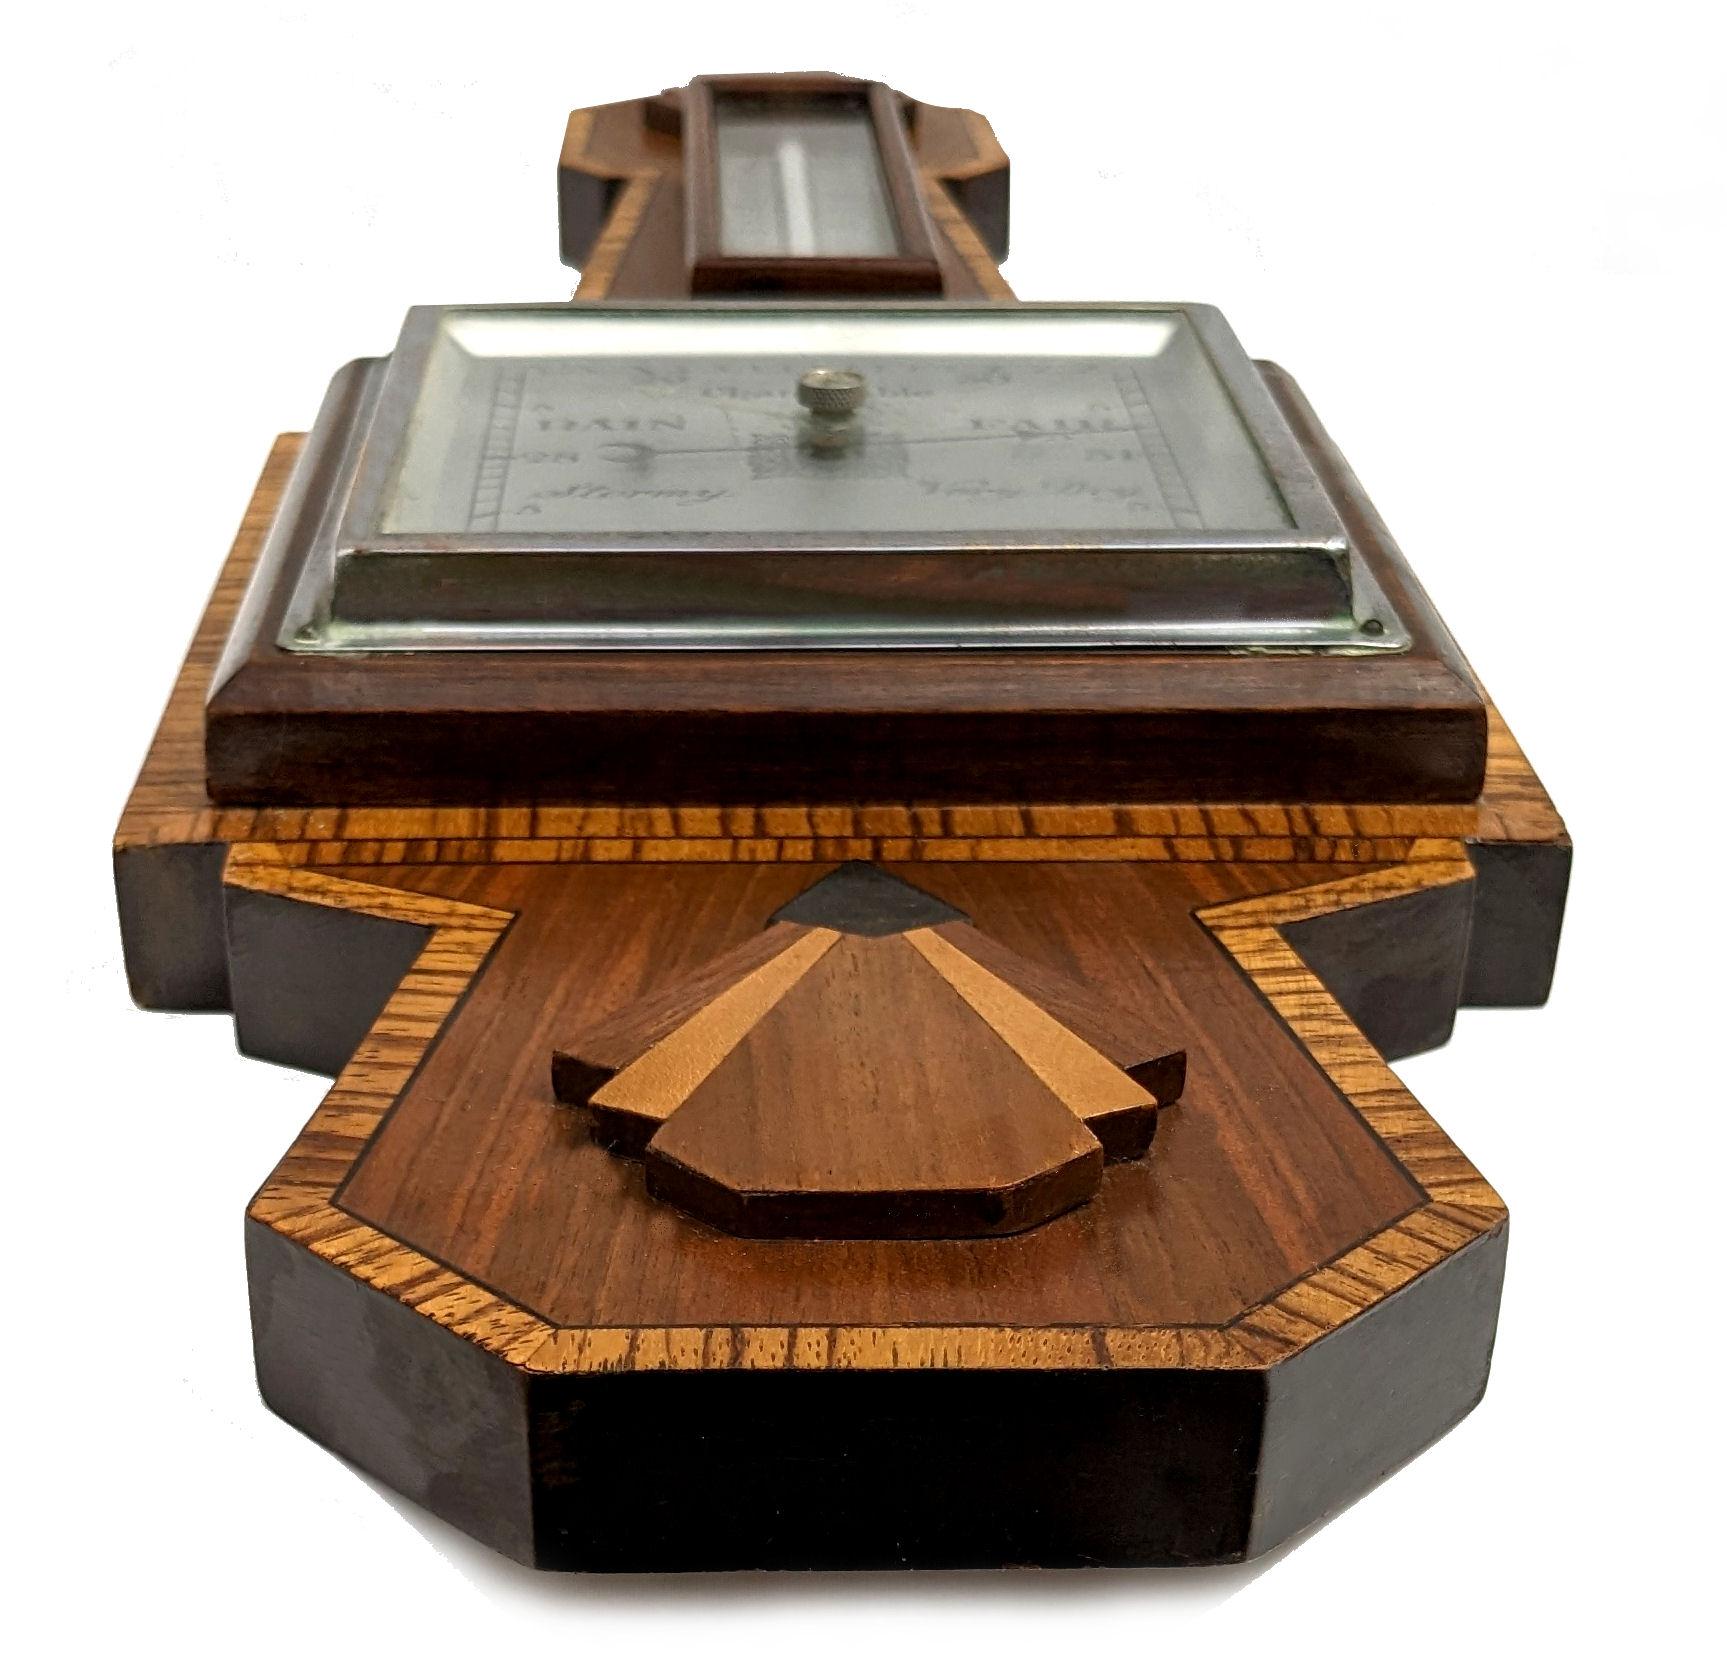 If you're looking for something a little different then look no further than this superbly styled Art Deco Barometer / Aneroid Thermometer. Features the most fabulous woodworking inlay marquetry. The whole shape with fan detailing screams Art Deco.